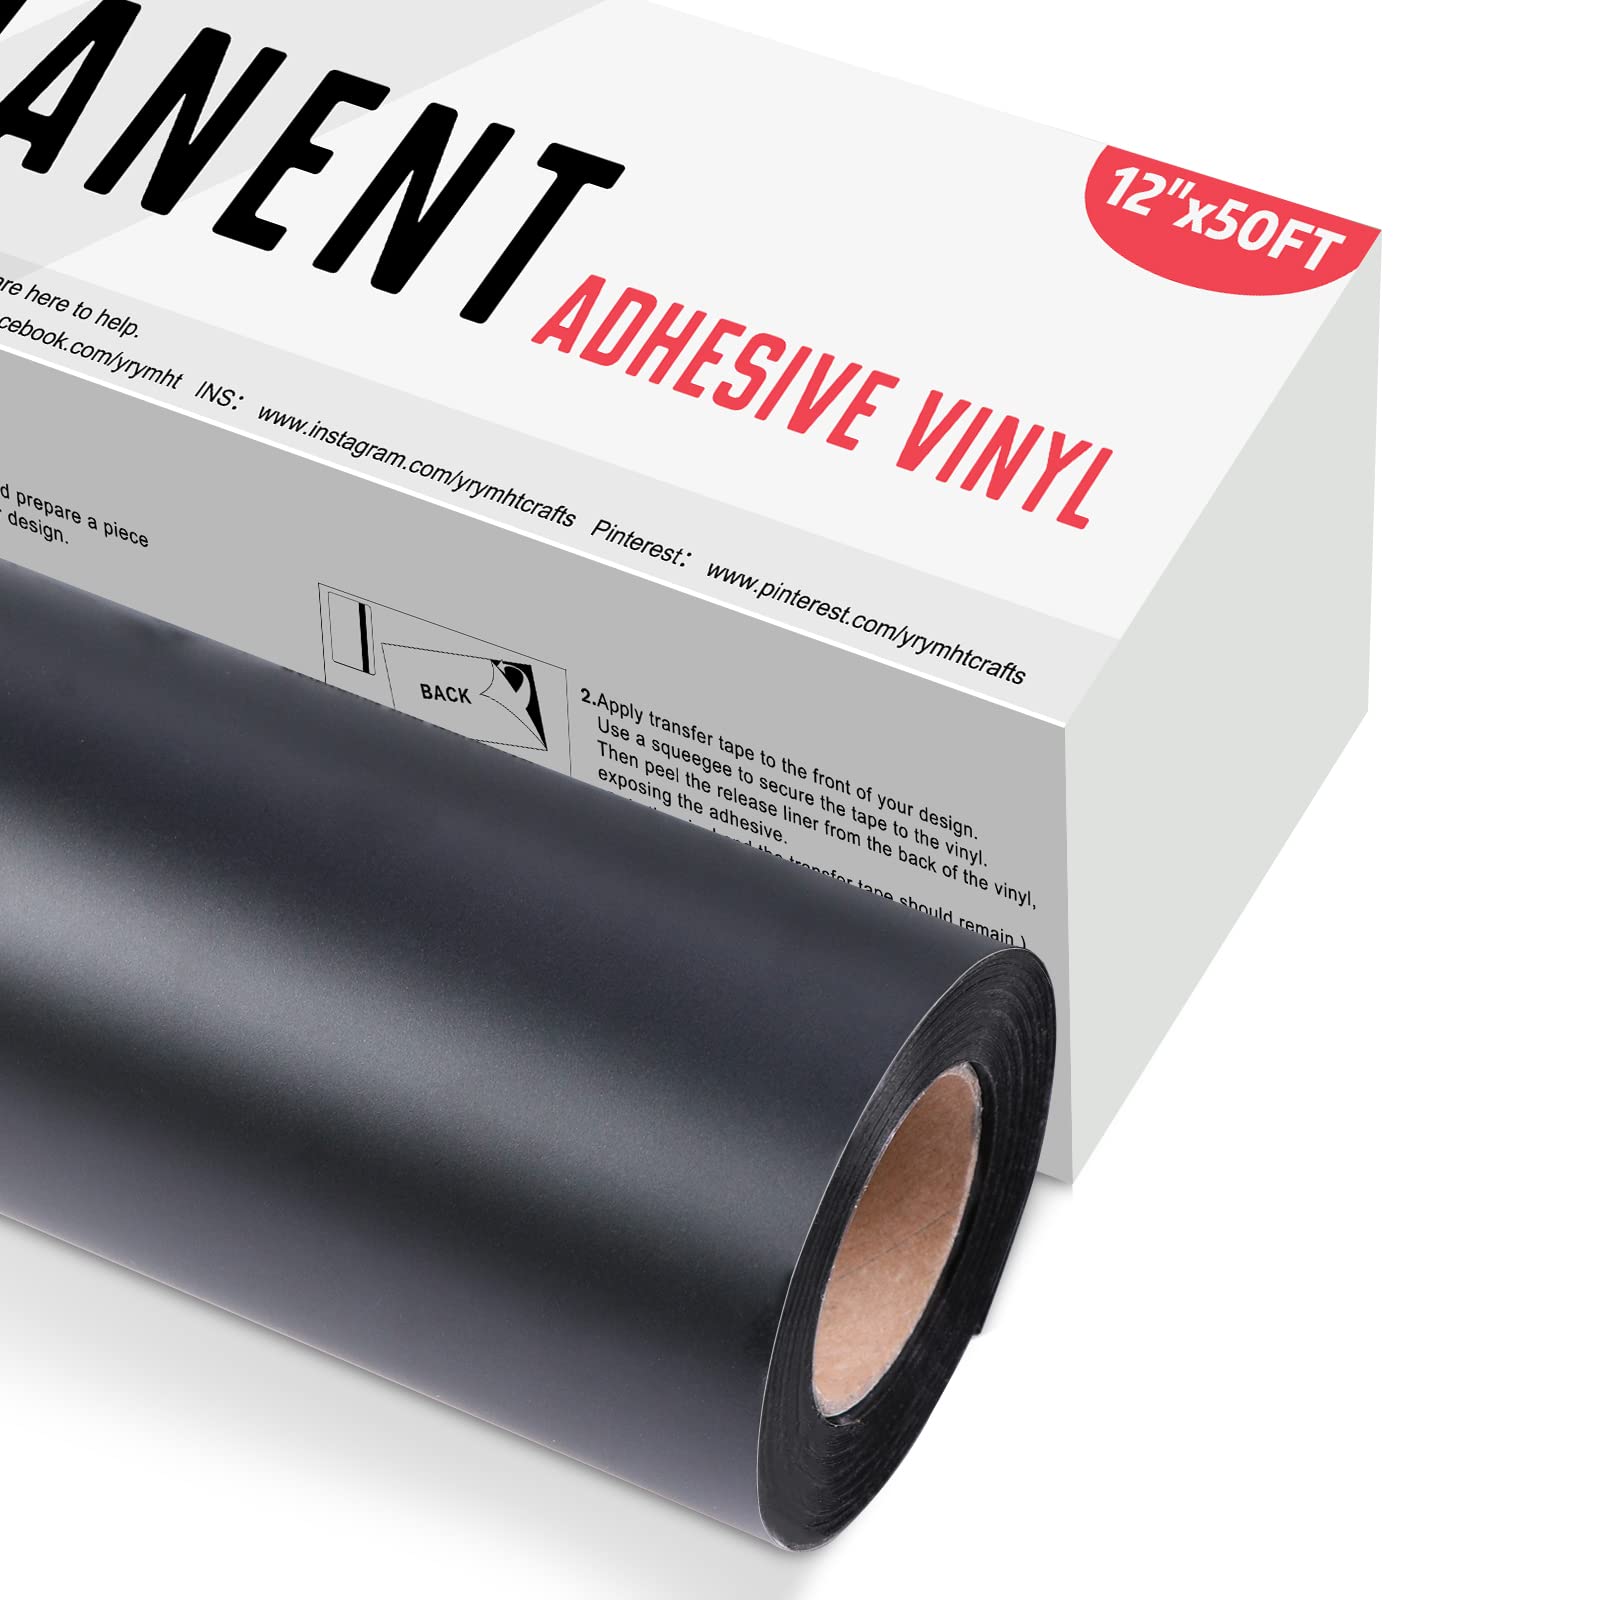 YRYM HT Black Permanent Adhesive Vinyl Roll - 12 x 50 FT for Signs  Scrapbooking Adhesive Vinyl Sheets for Cricut Silhouette and Cameo Cutters